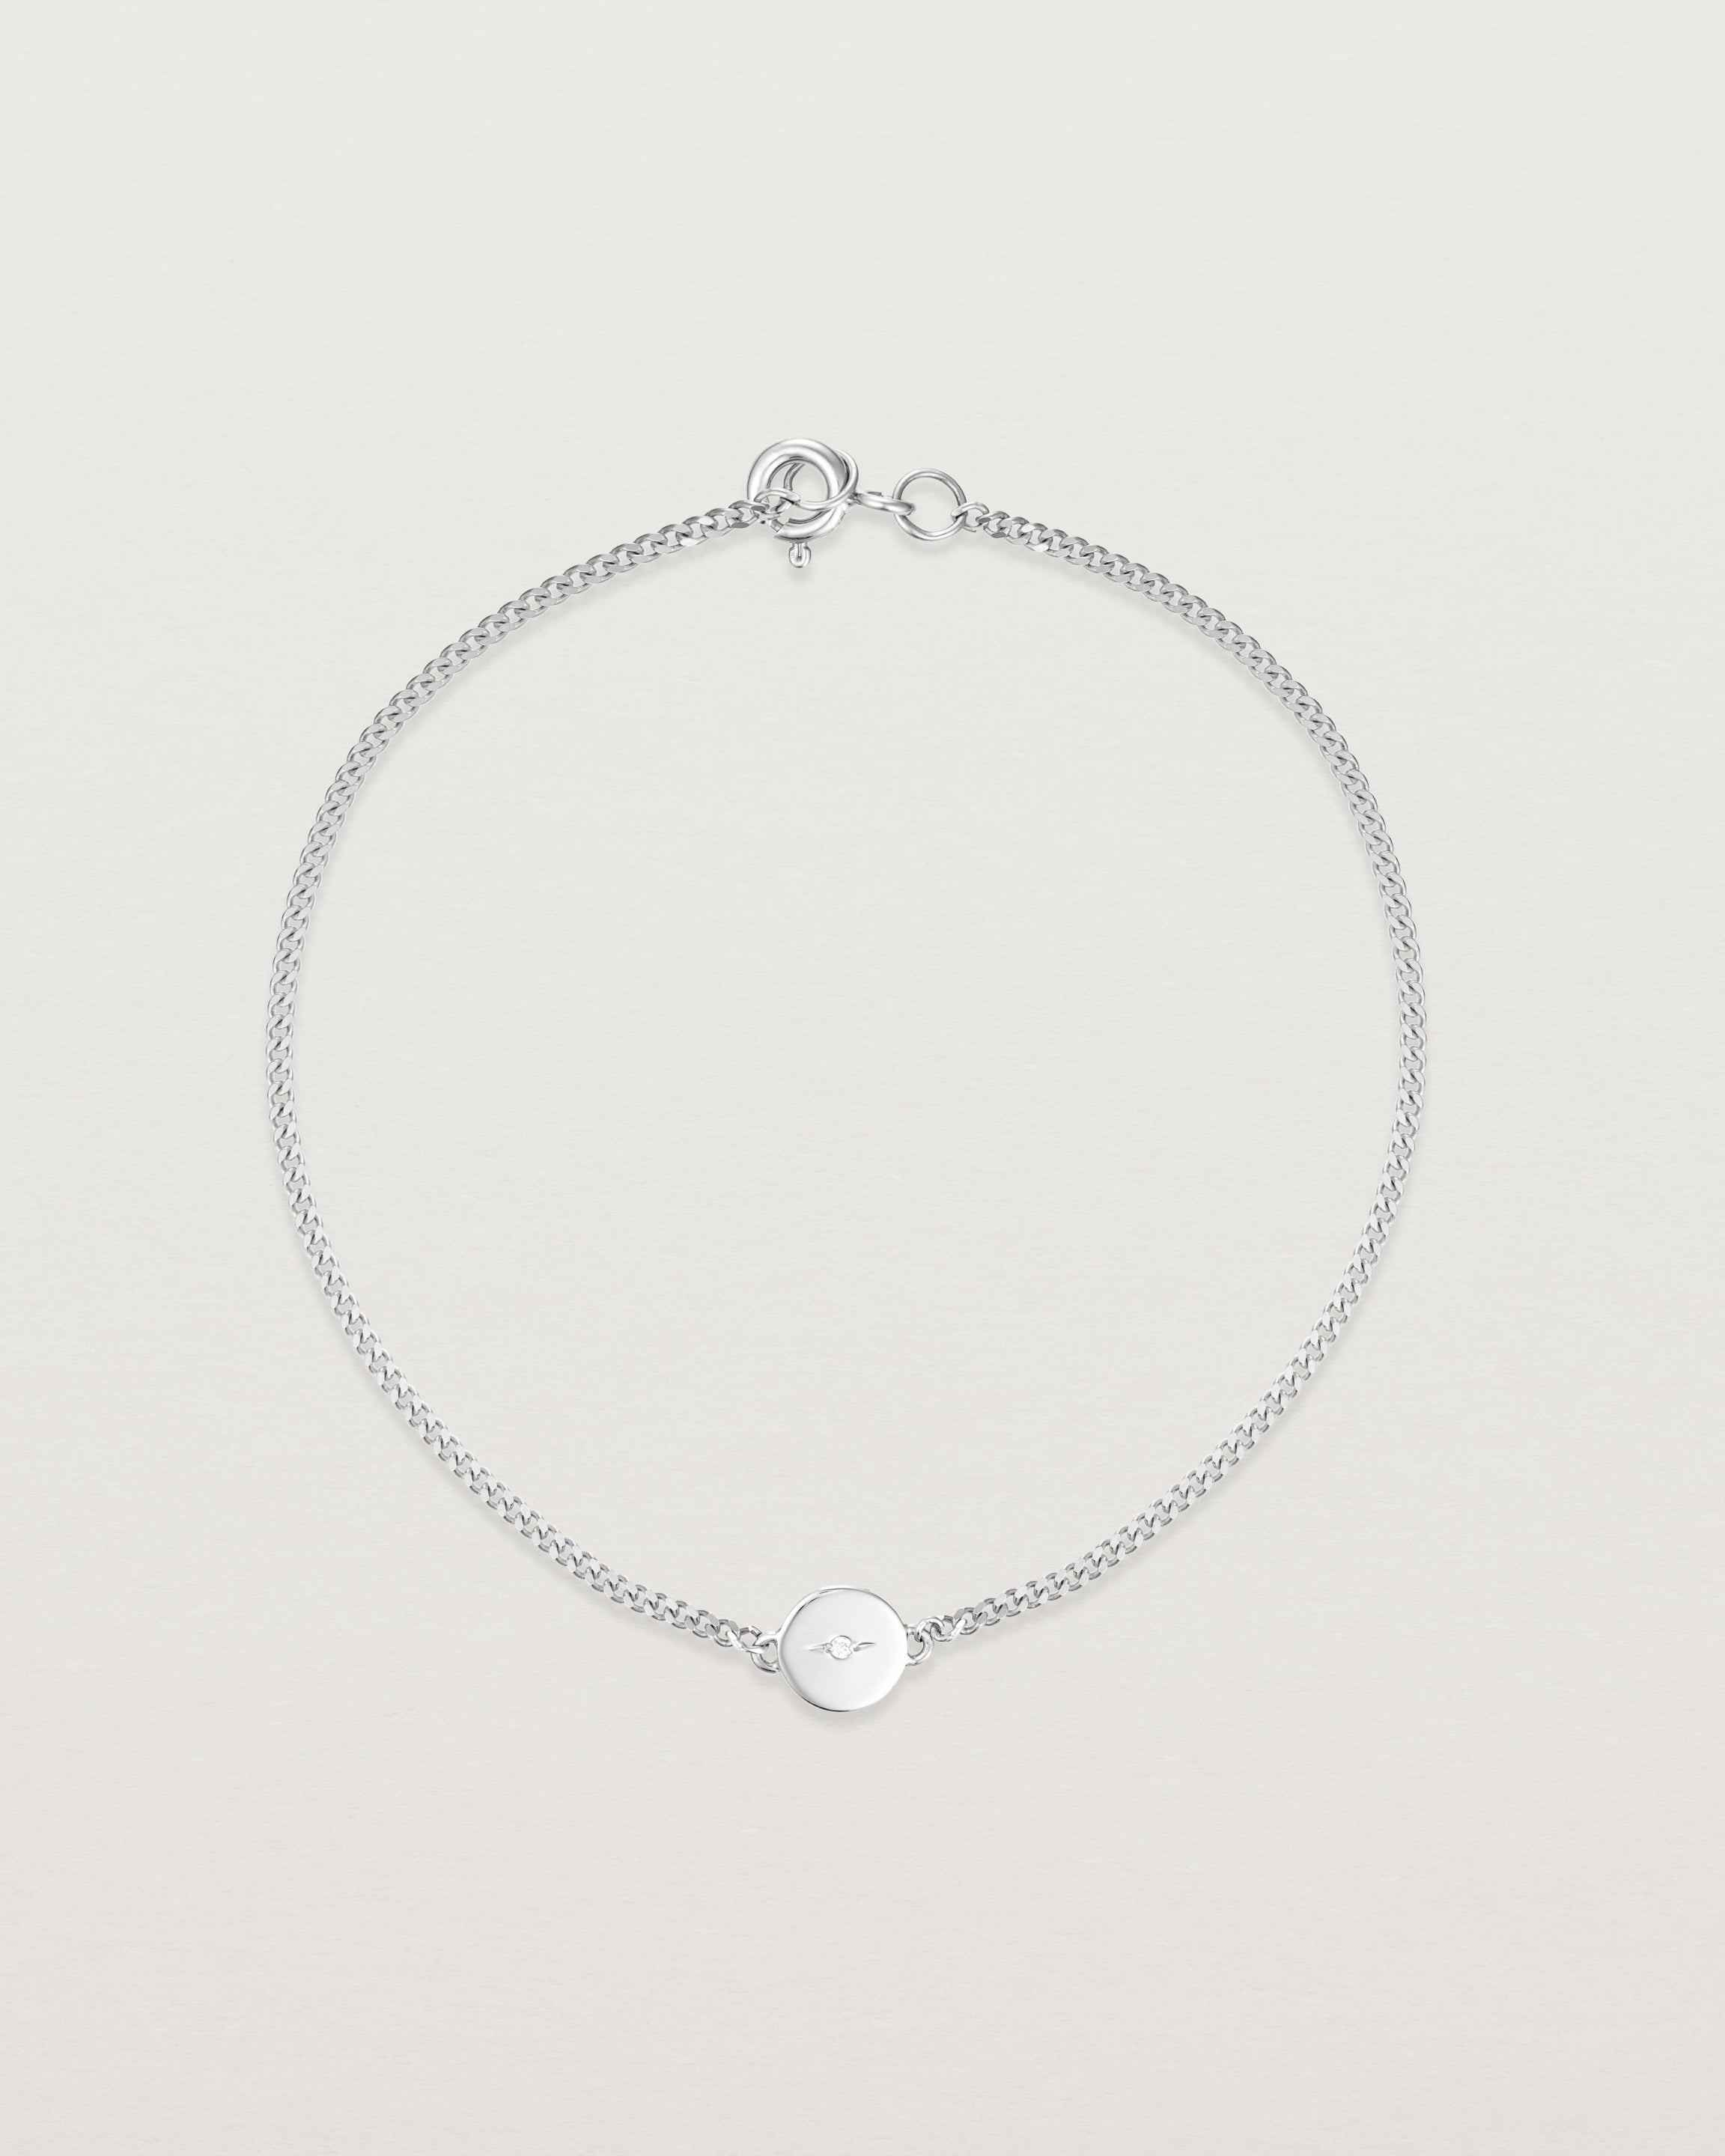 Top view of the Eily Bracelet | Birthstone in white gold.